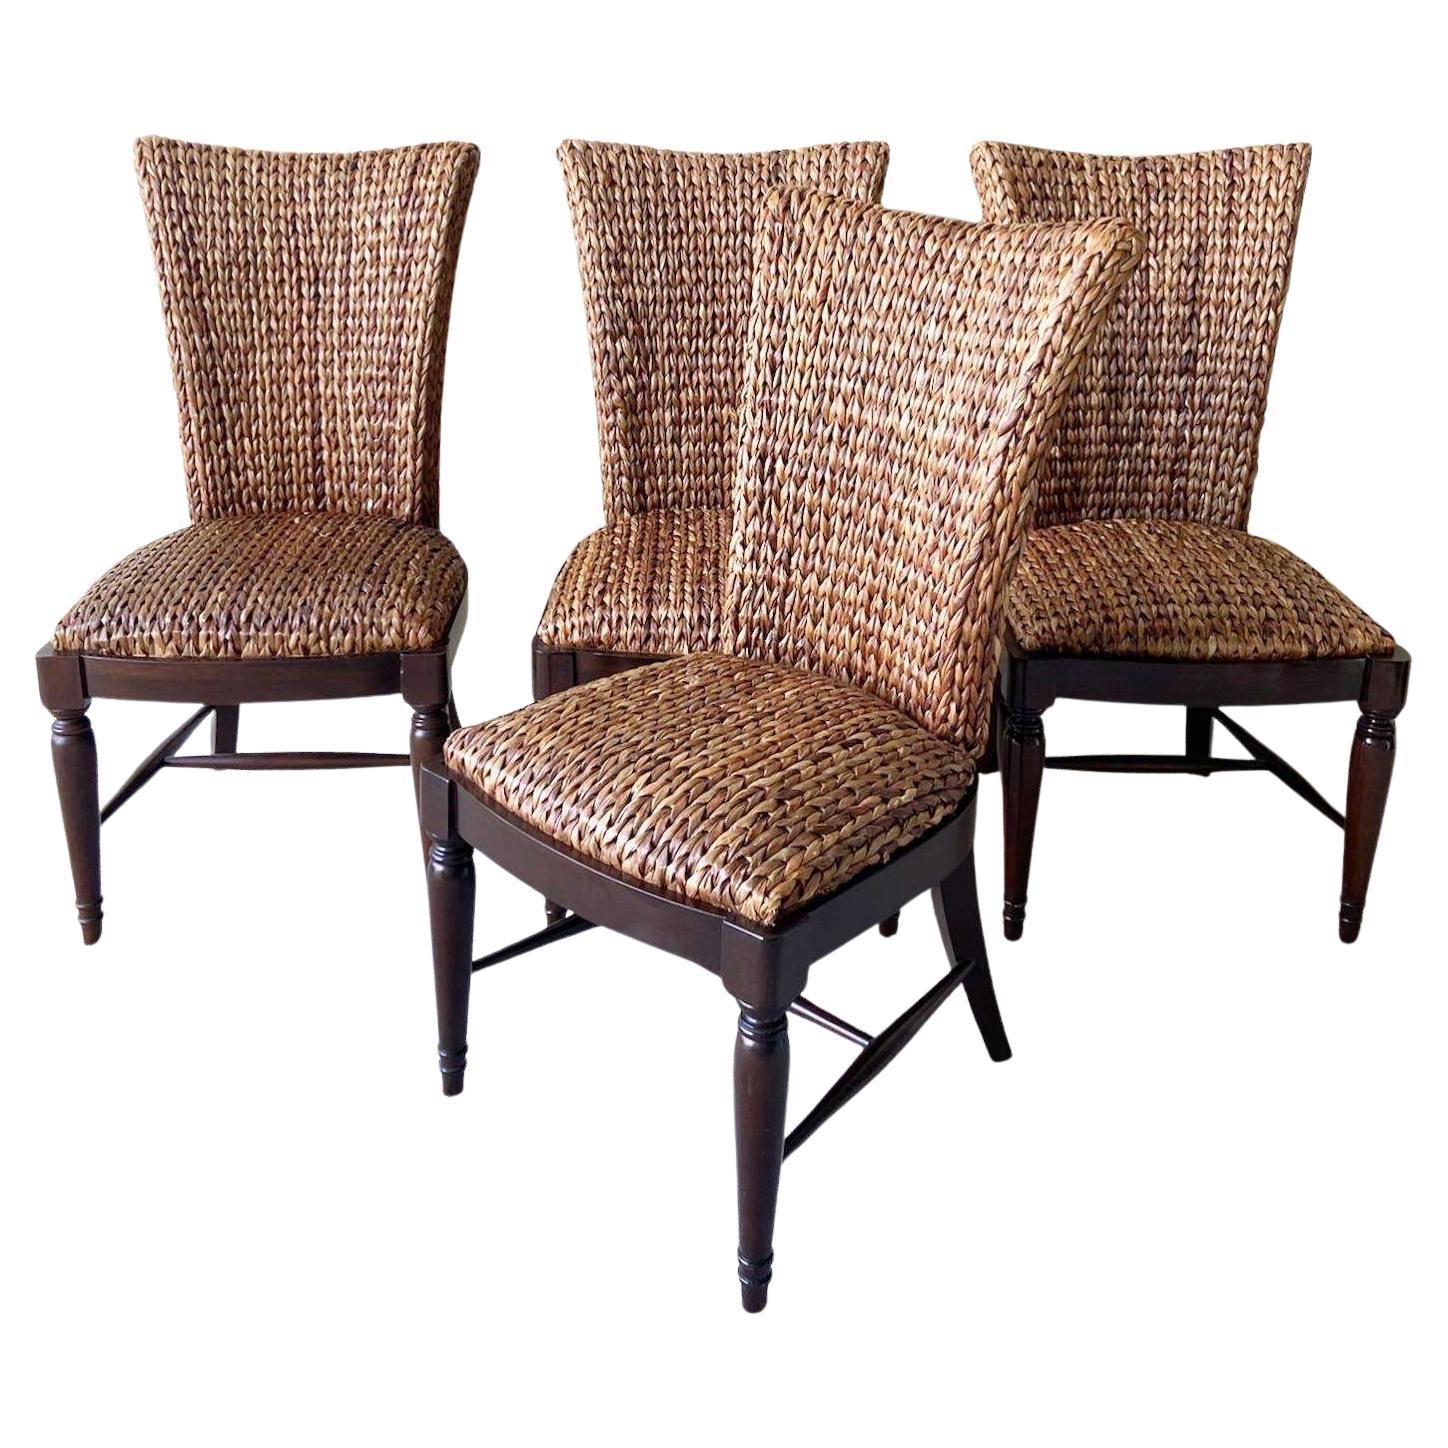 Boho Chic Woven Sea Grass Dining Chairs - Set of 4